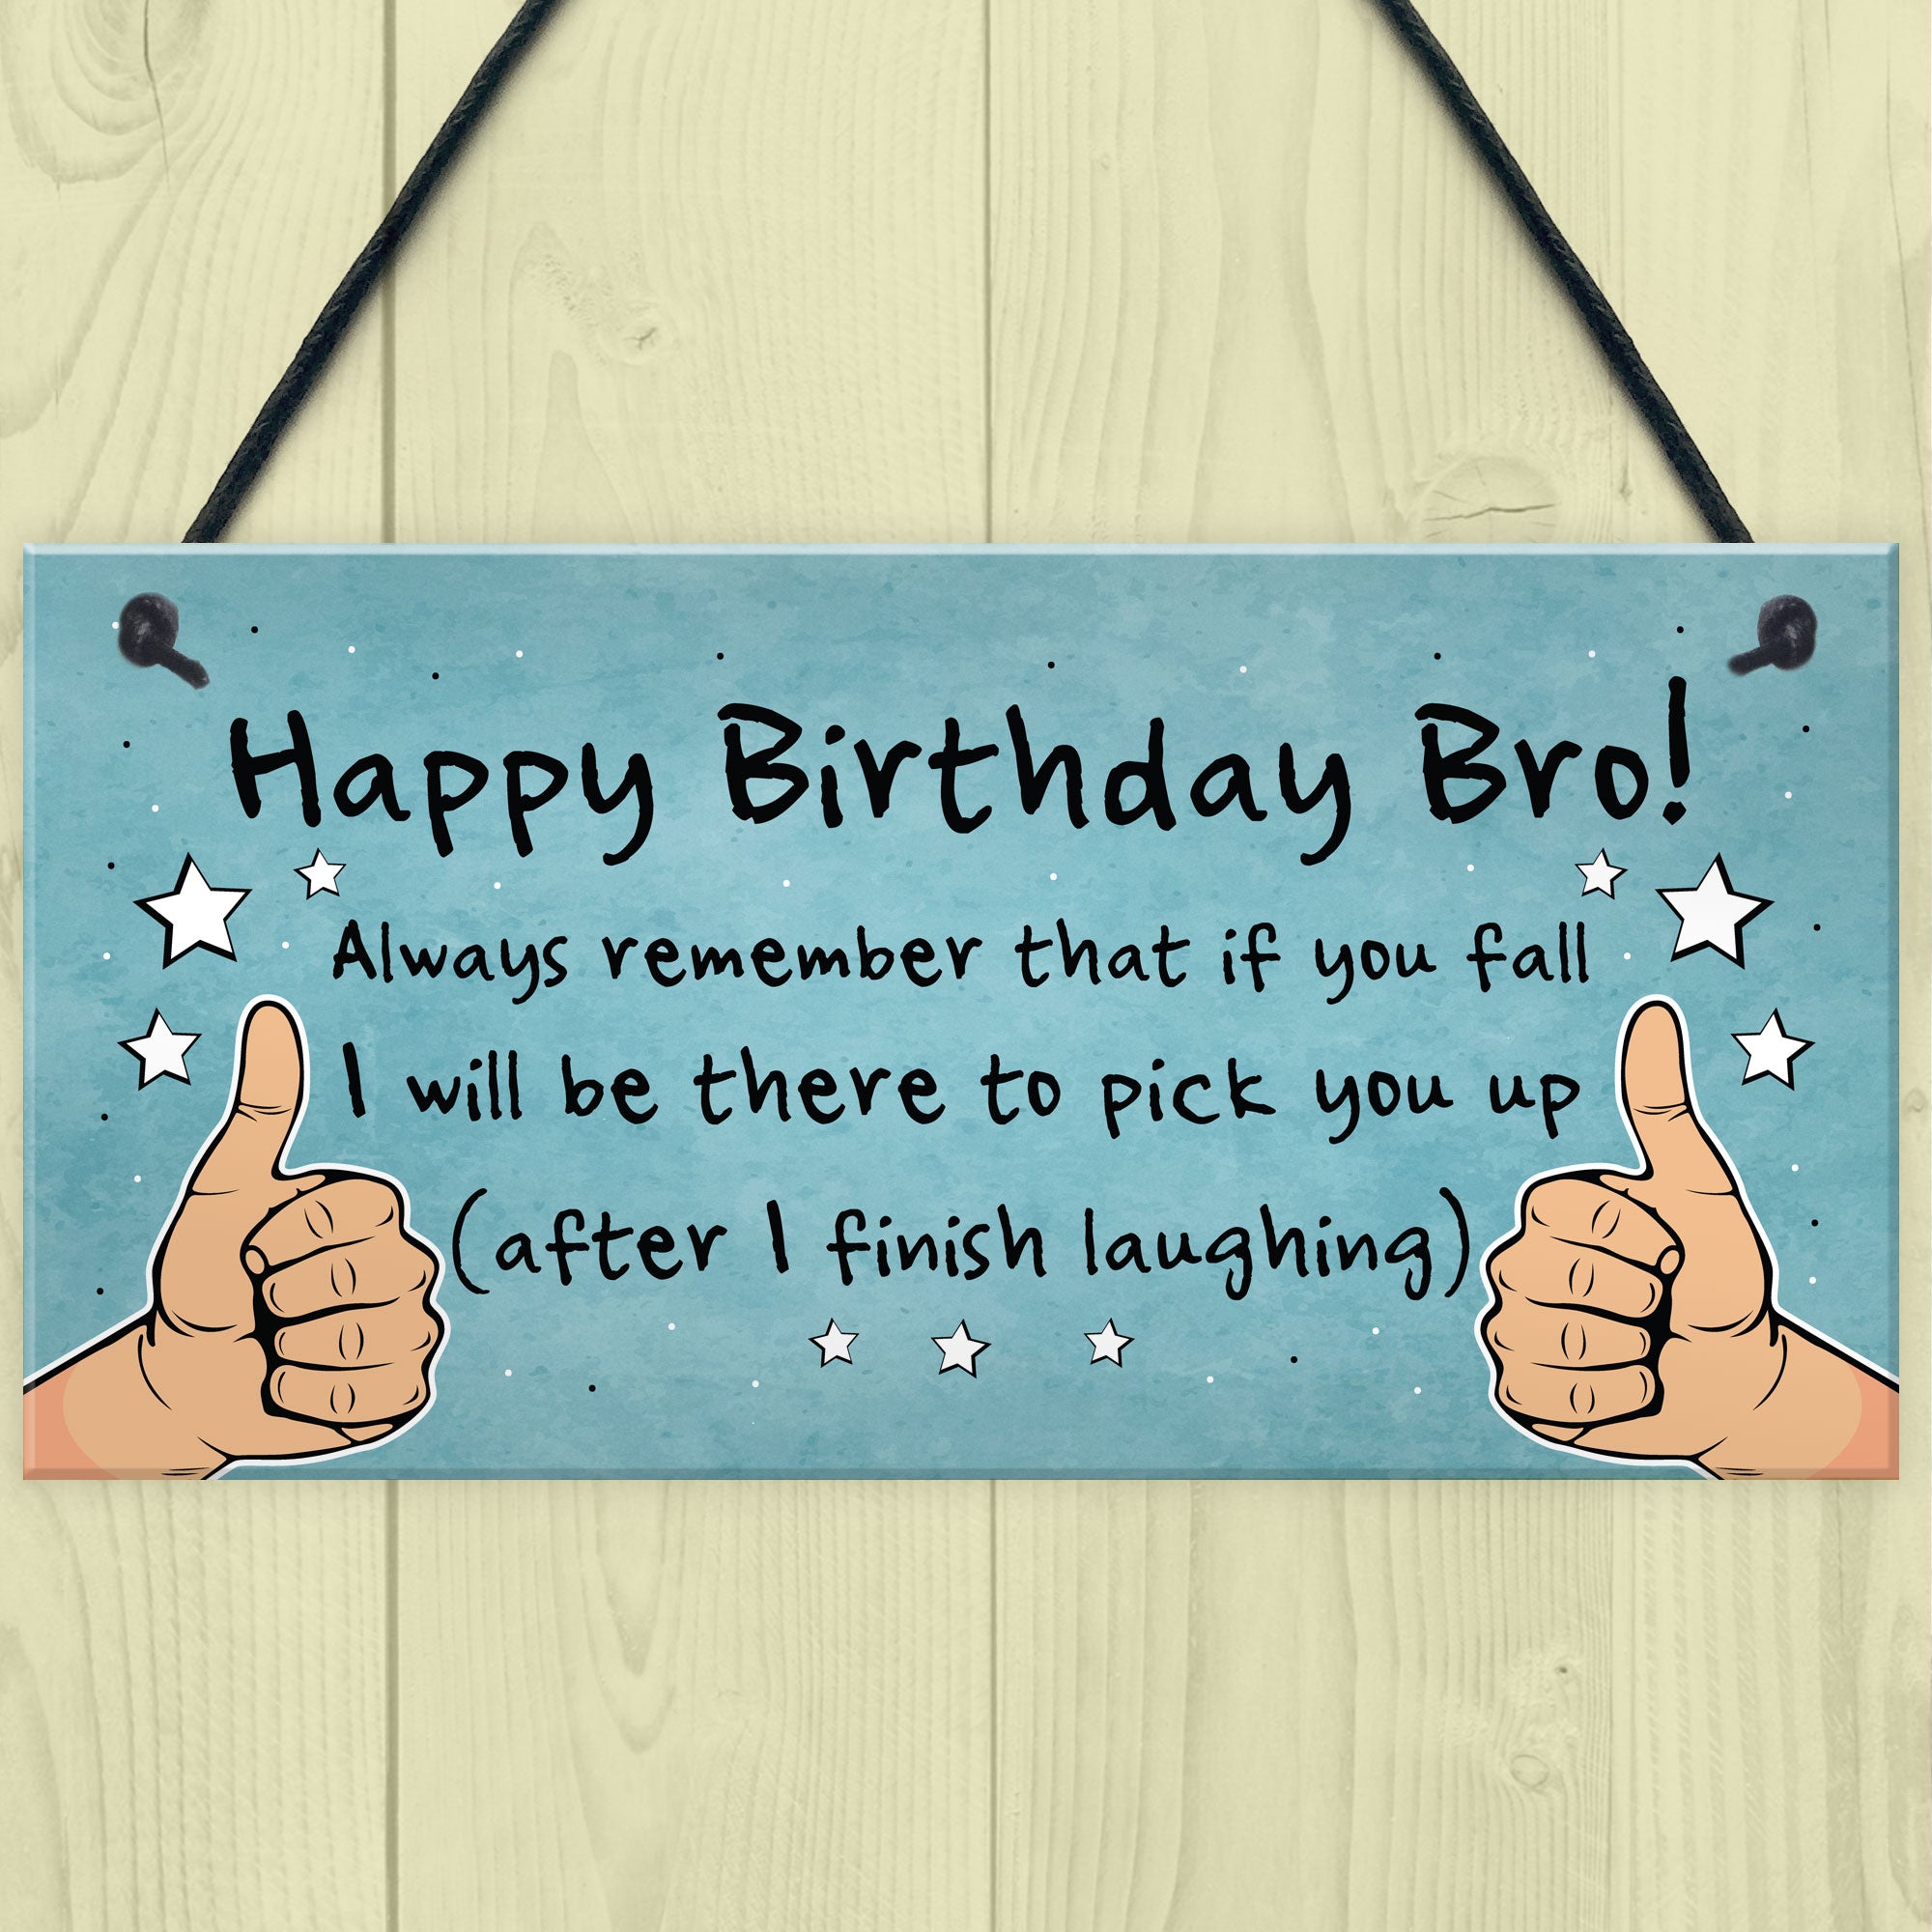 Buy Birthday Gift for Brother | Birthday Gifts Ideas - MyFlowerTree